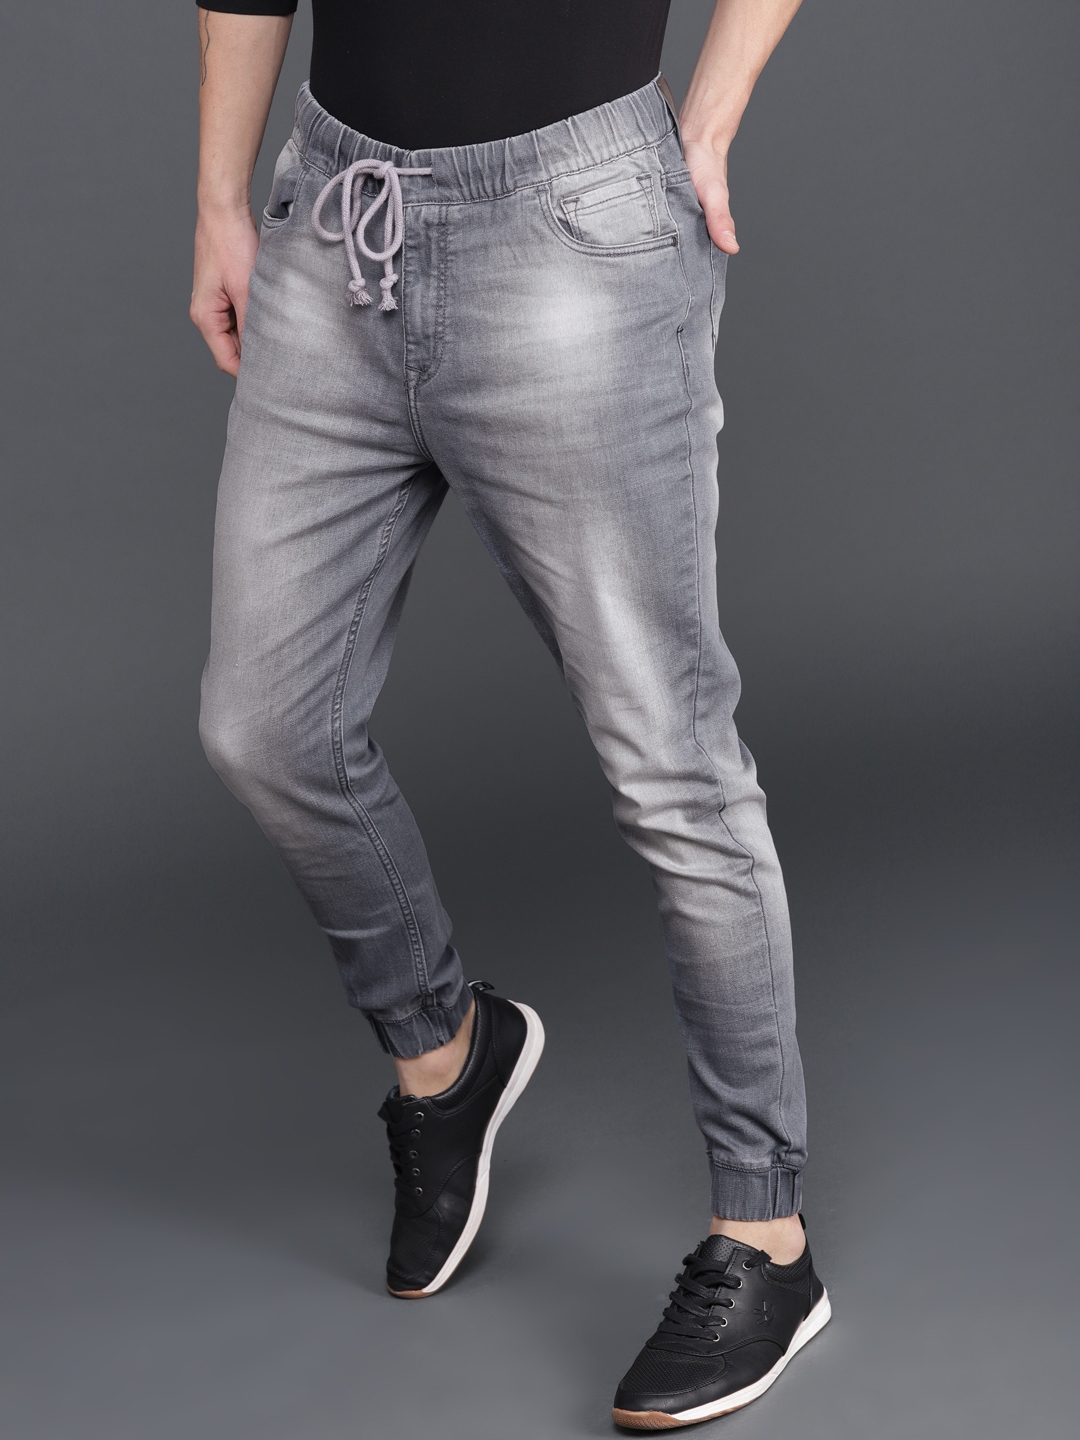 wrogn jeans joggers